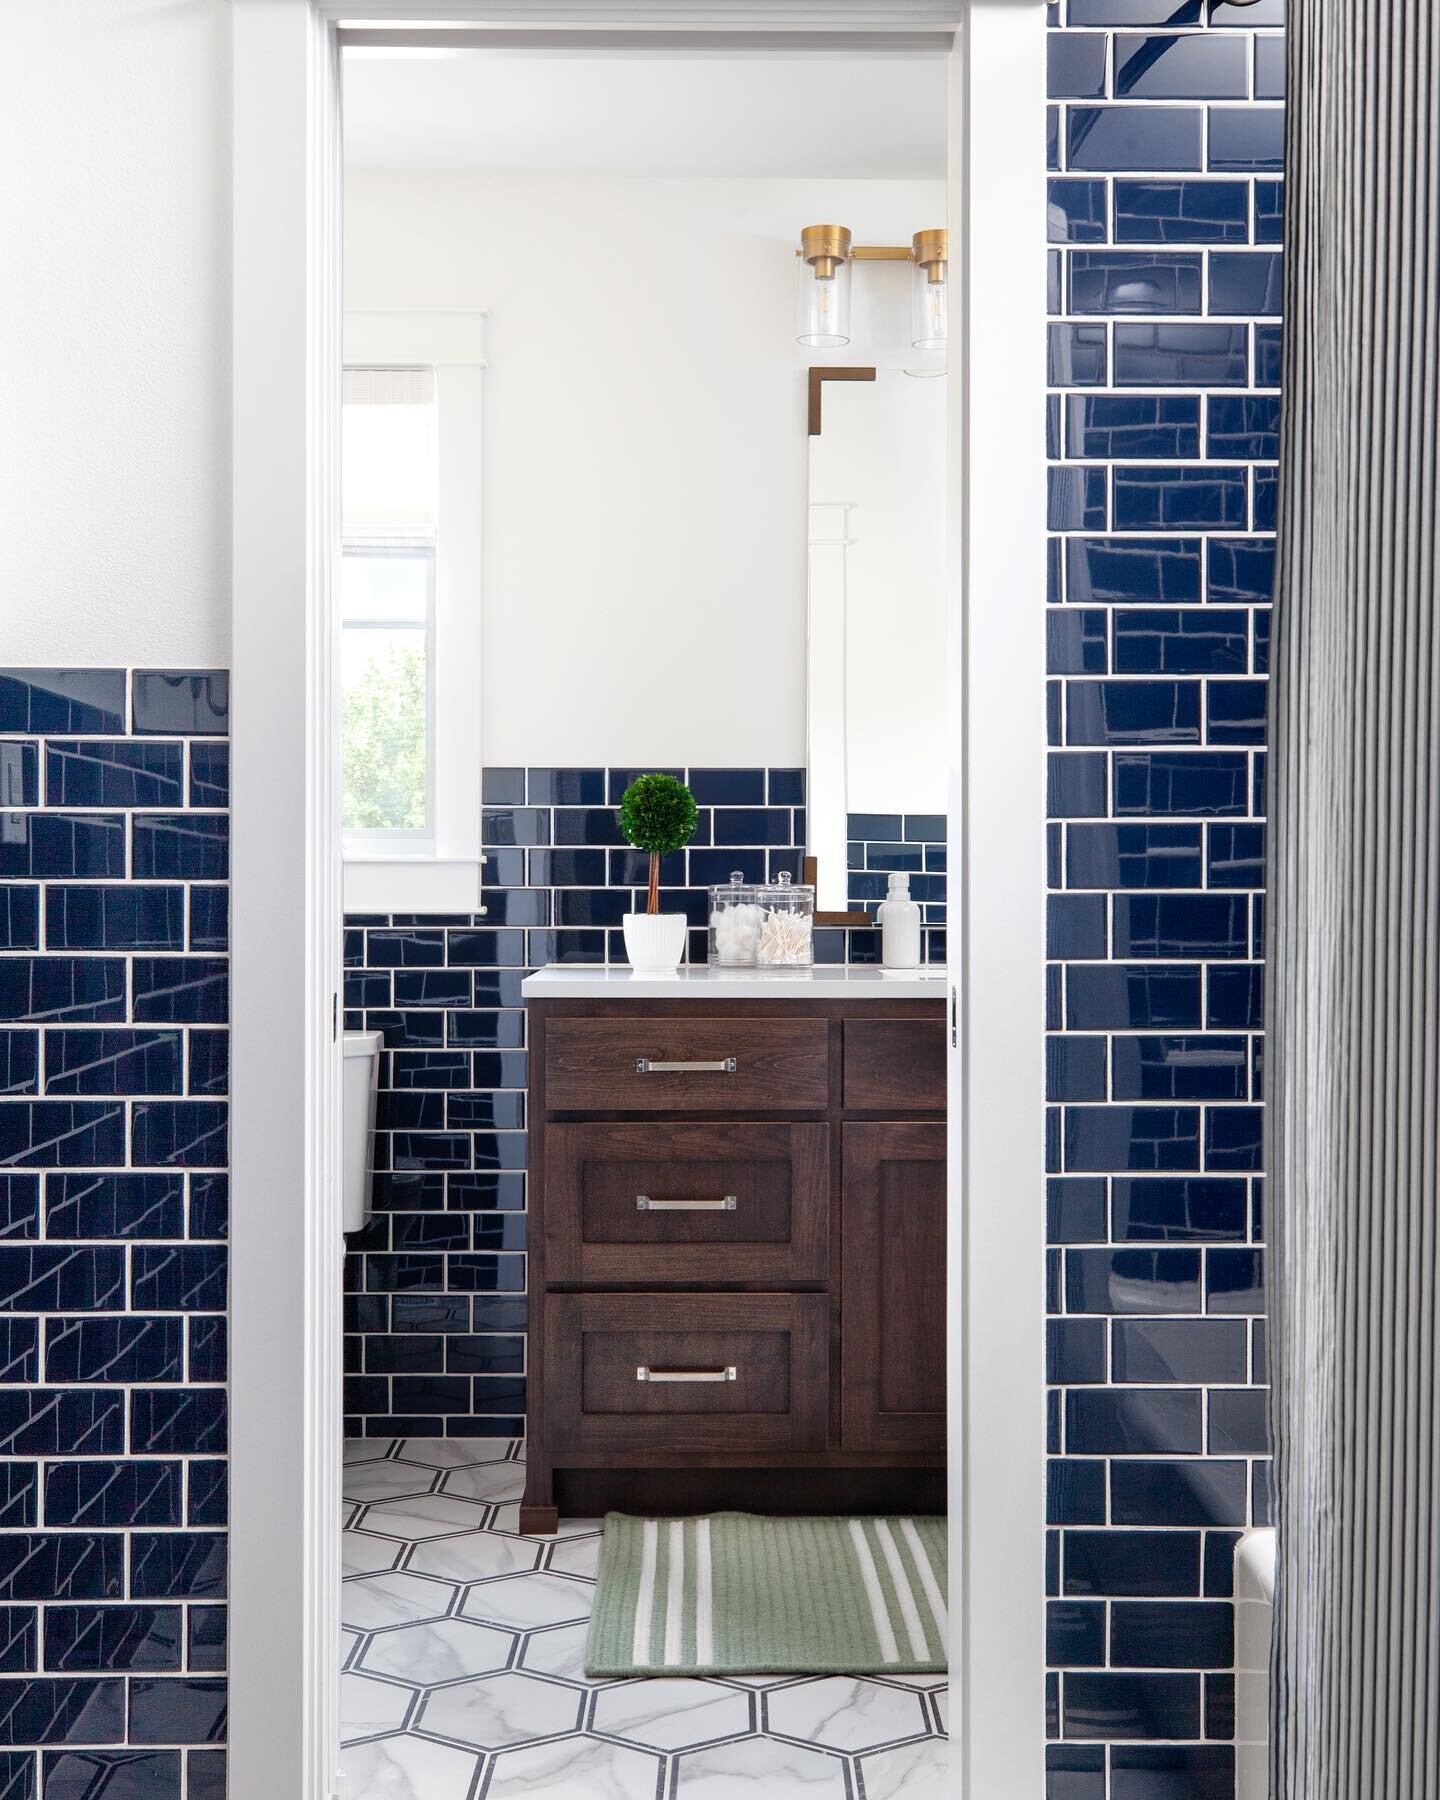 Durability &amp; function is the motto of this boys bathroom! We dreamt of this tile coming to life and it was even better than expected. 
.
.
Photography | @jillockhardtblaufuss